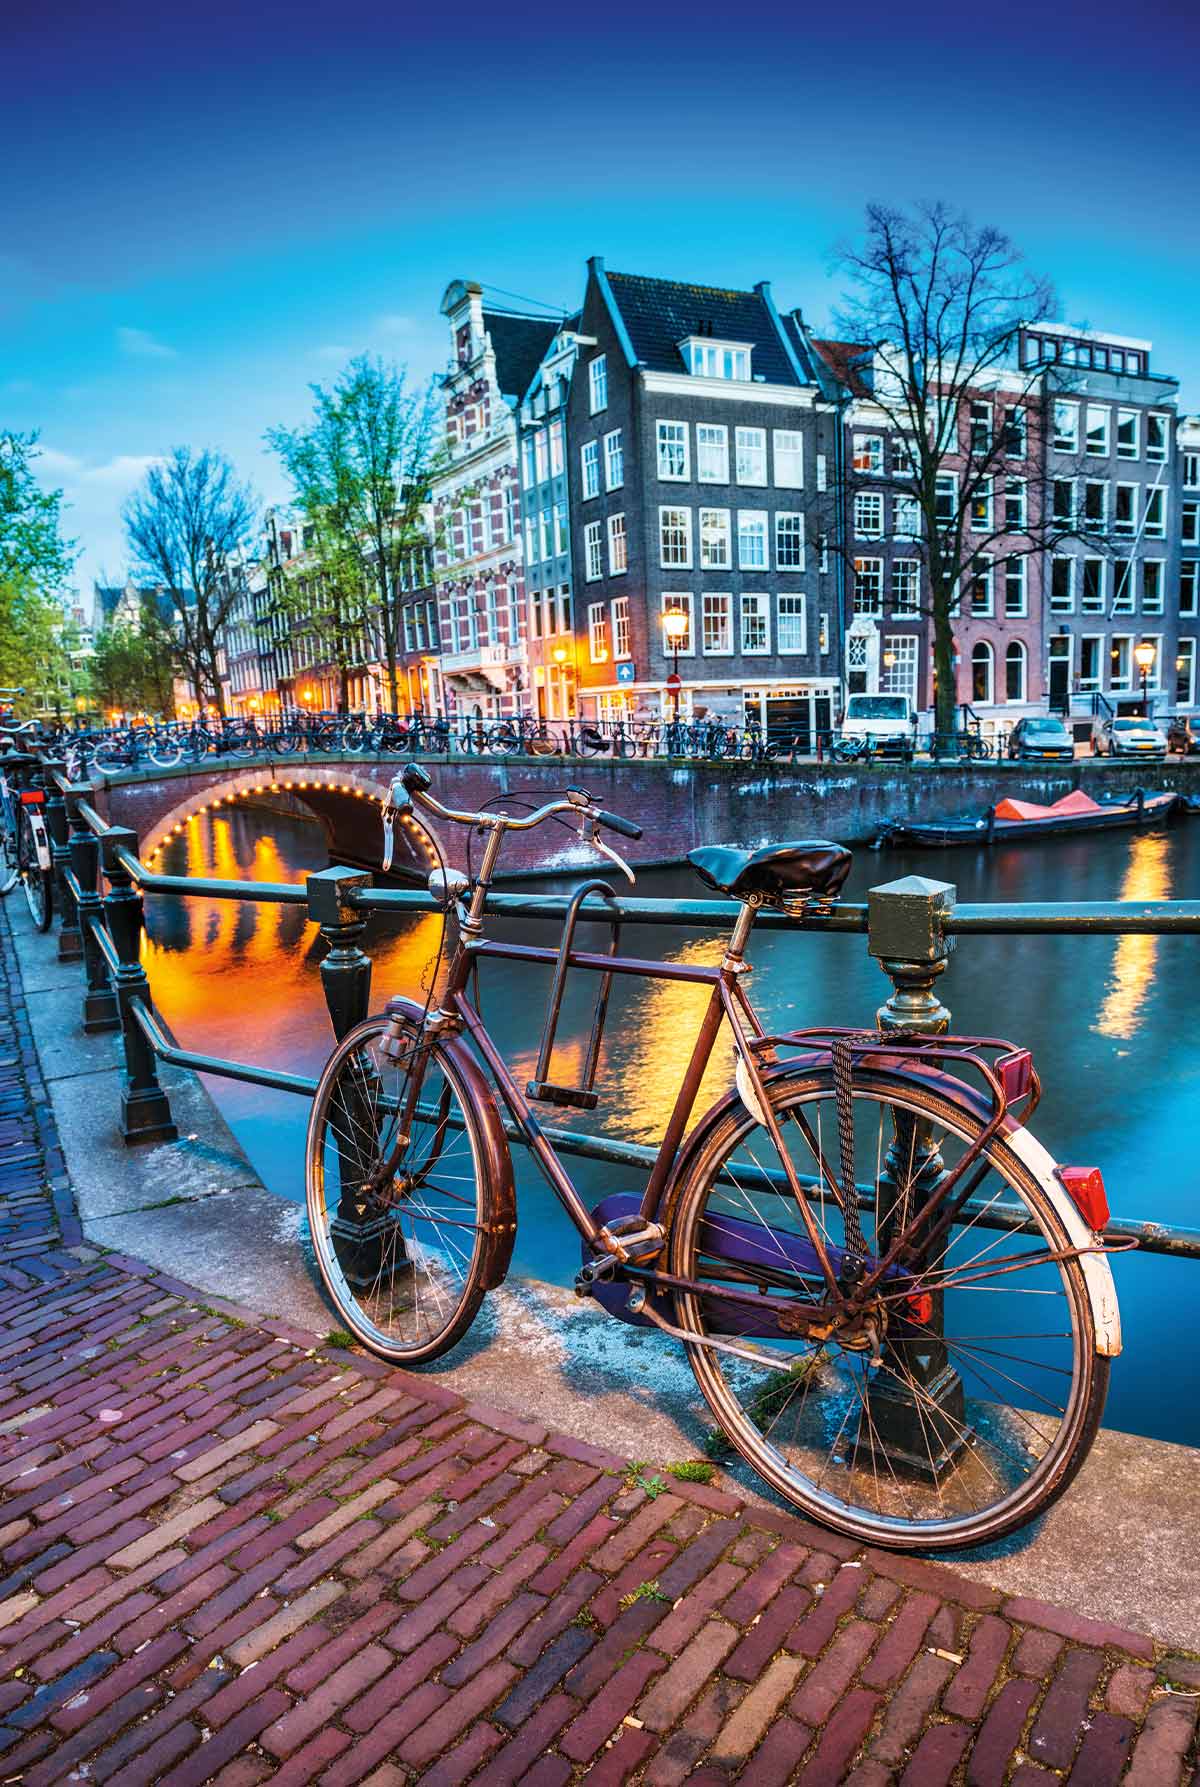 A bicycle parked in downtown Amsterdam, Netherlands